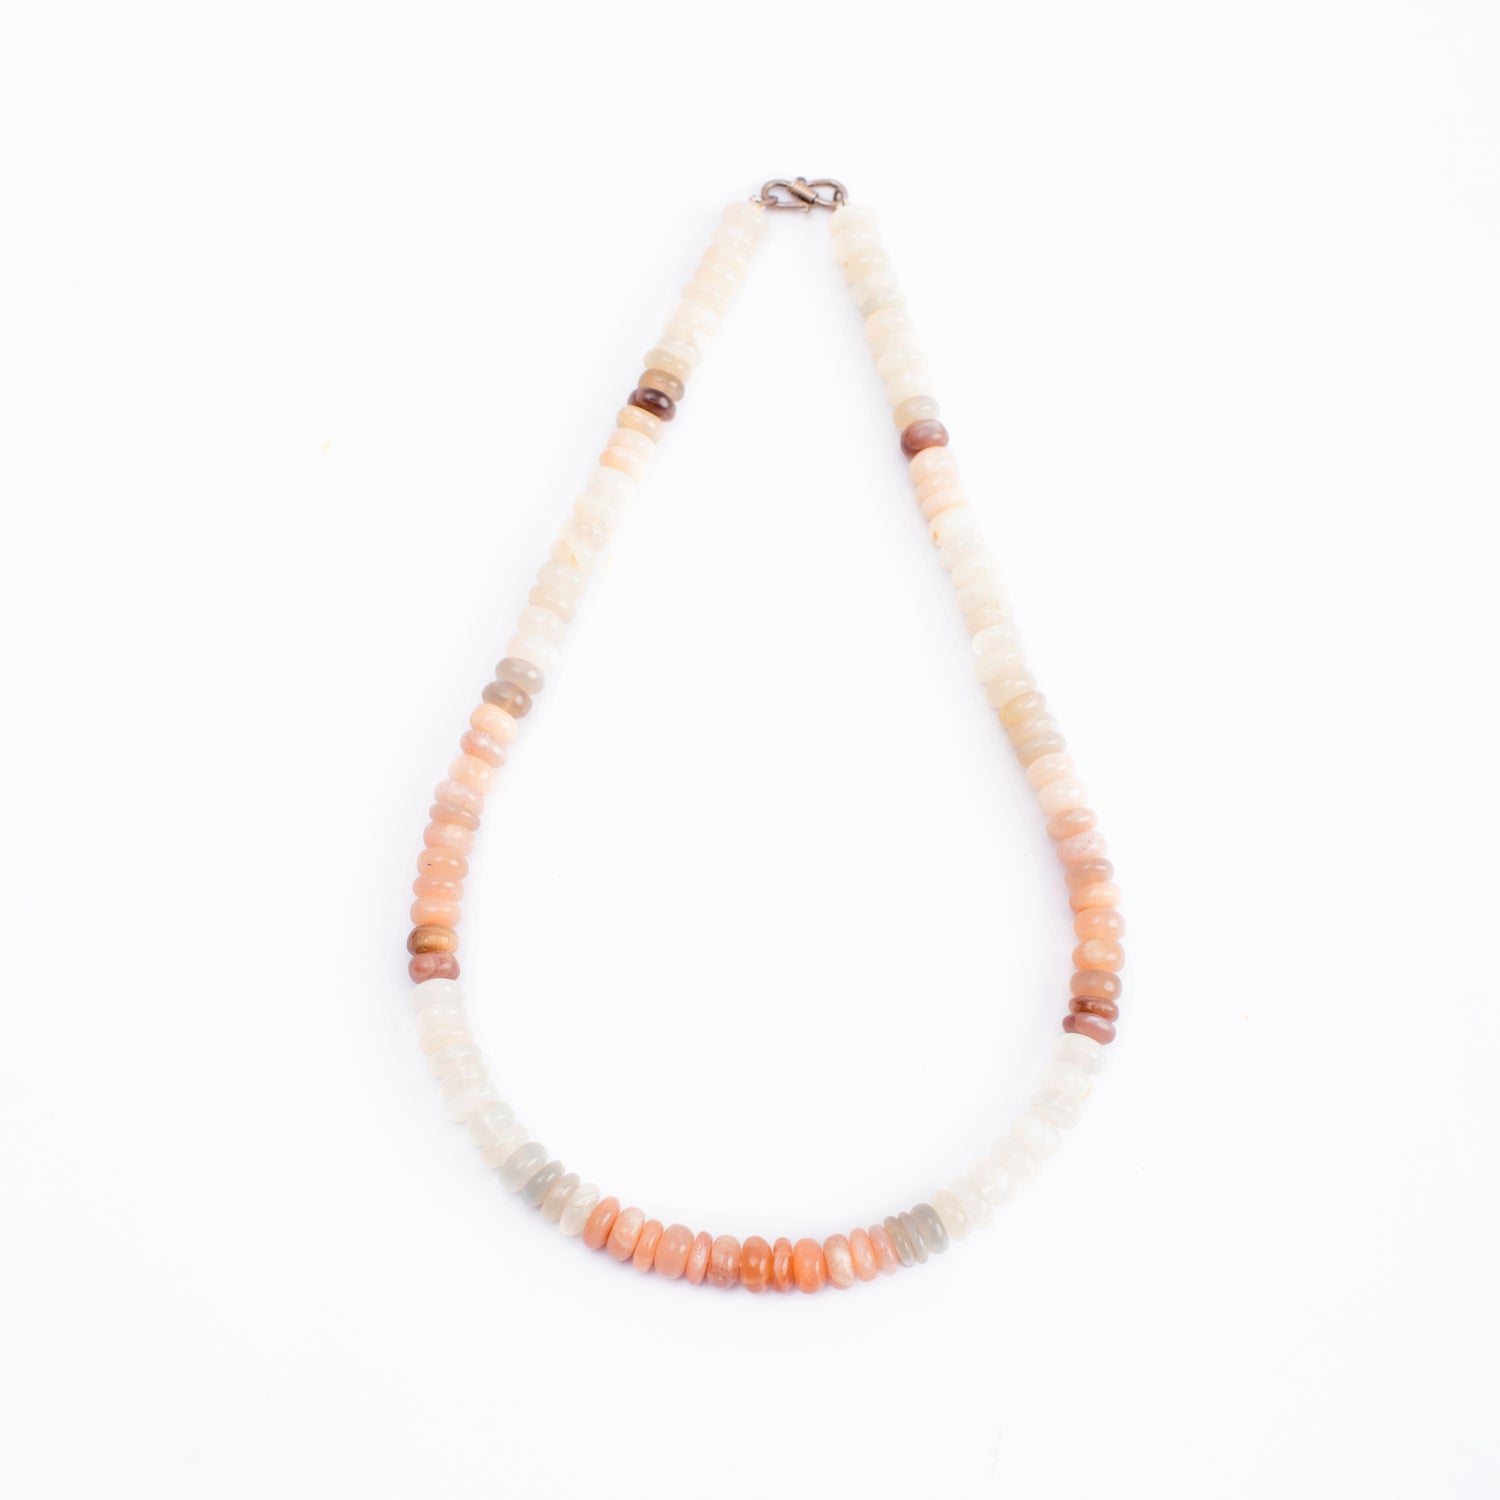 Moonstone Multicolored Oval Beads Necklace